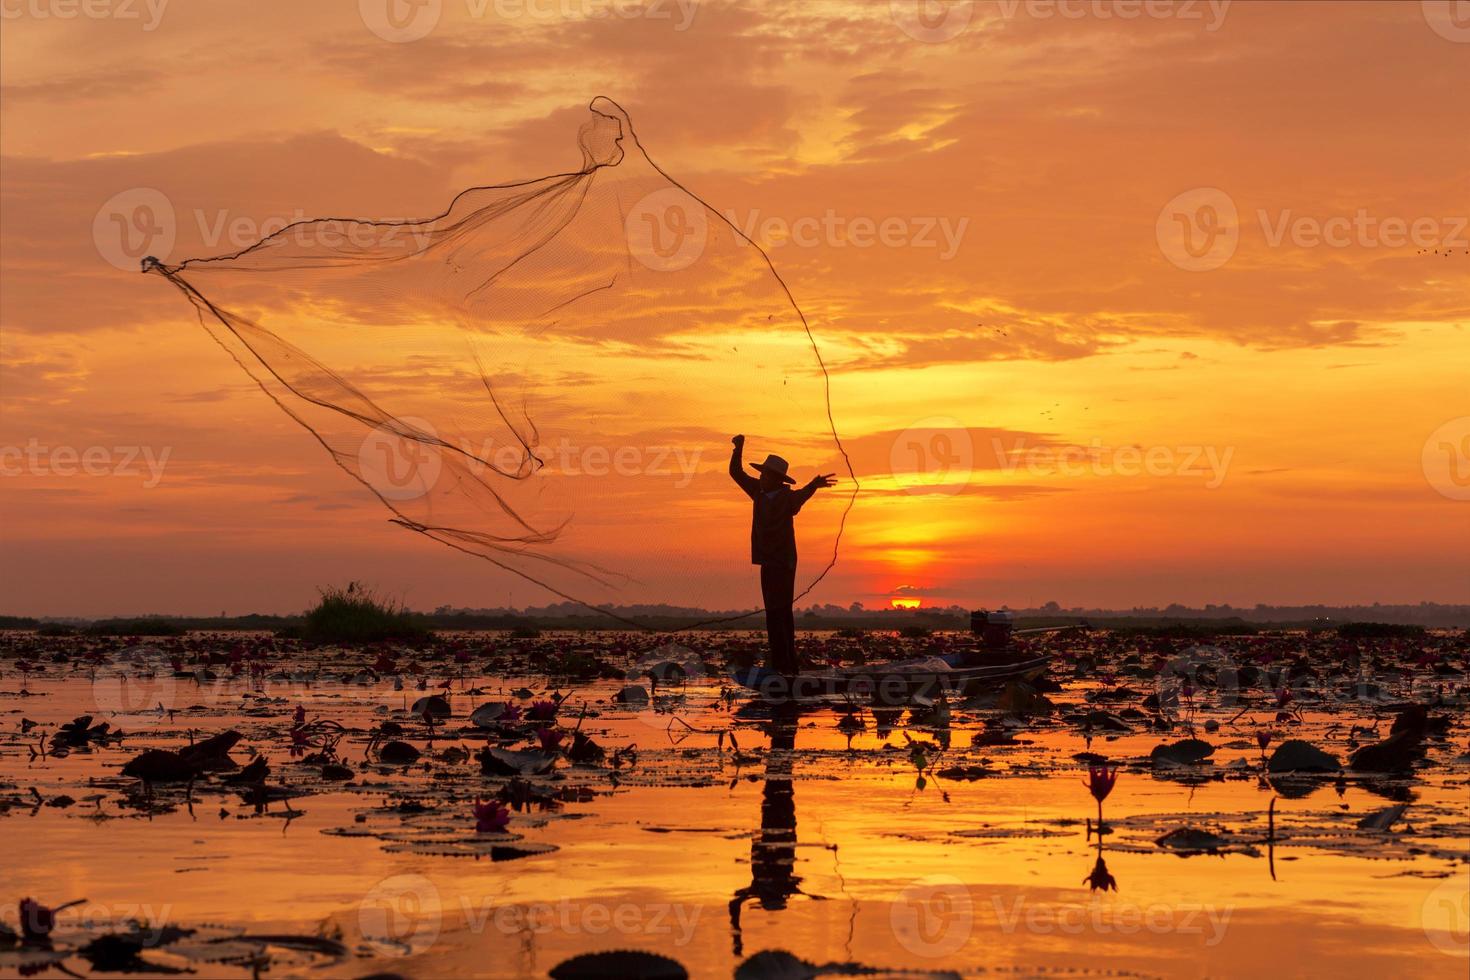 Silhouette fishing net this is fisherman standing on a boat in during sunrise at lake Udon Thani, Thailand. photo